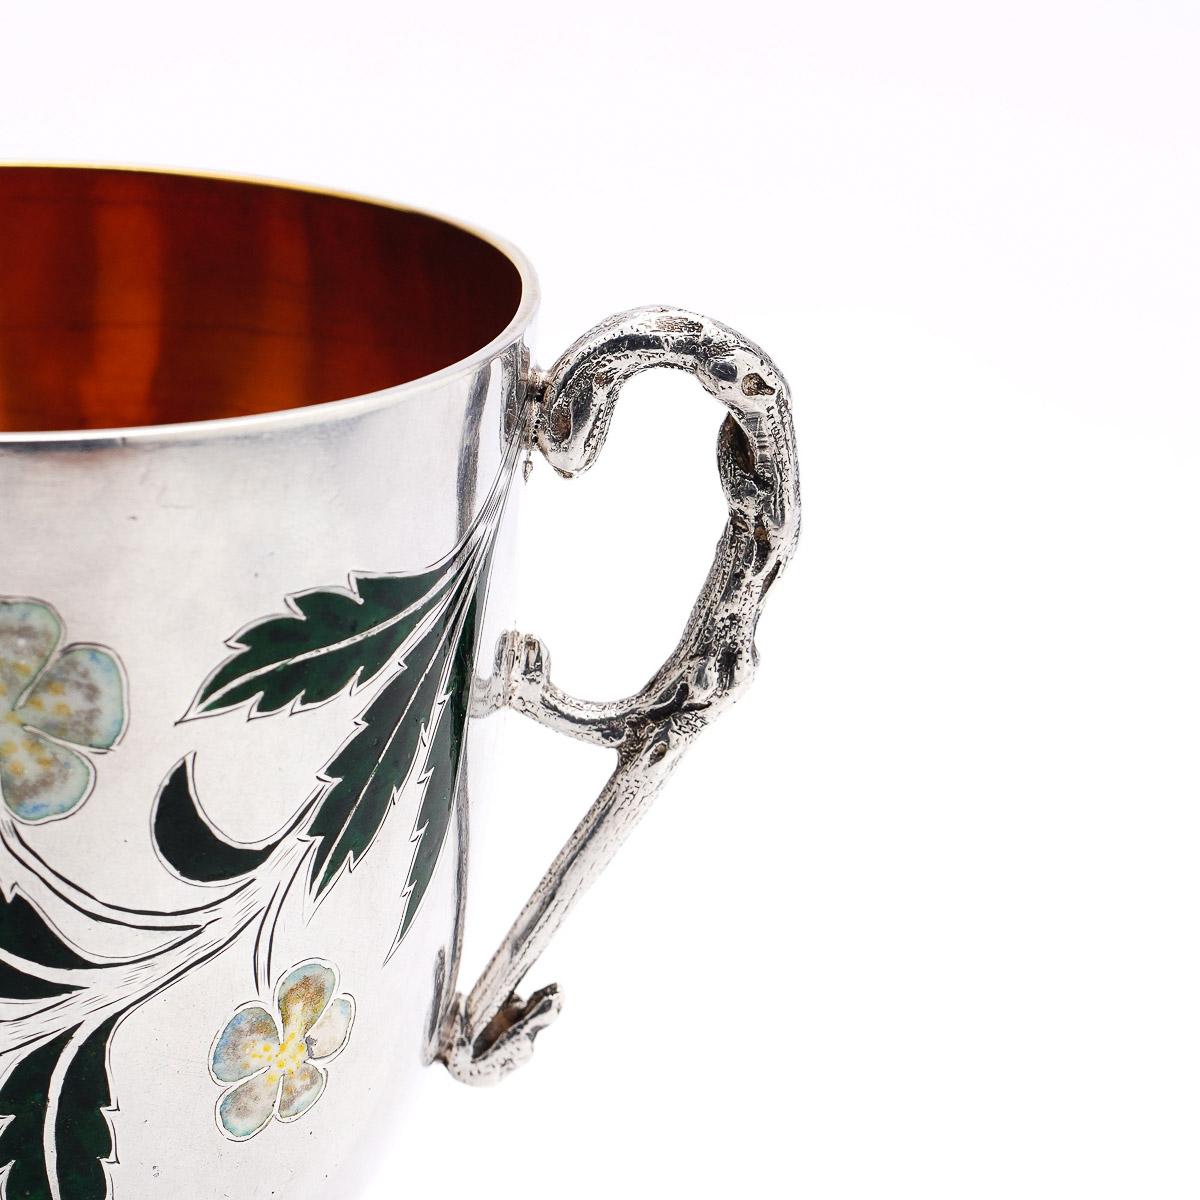 19th Century Victorian Solid Silver & Champleve Enamel Tea Cup and Sauce, c.1875 For Sale 2